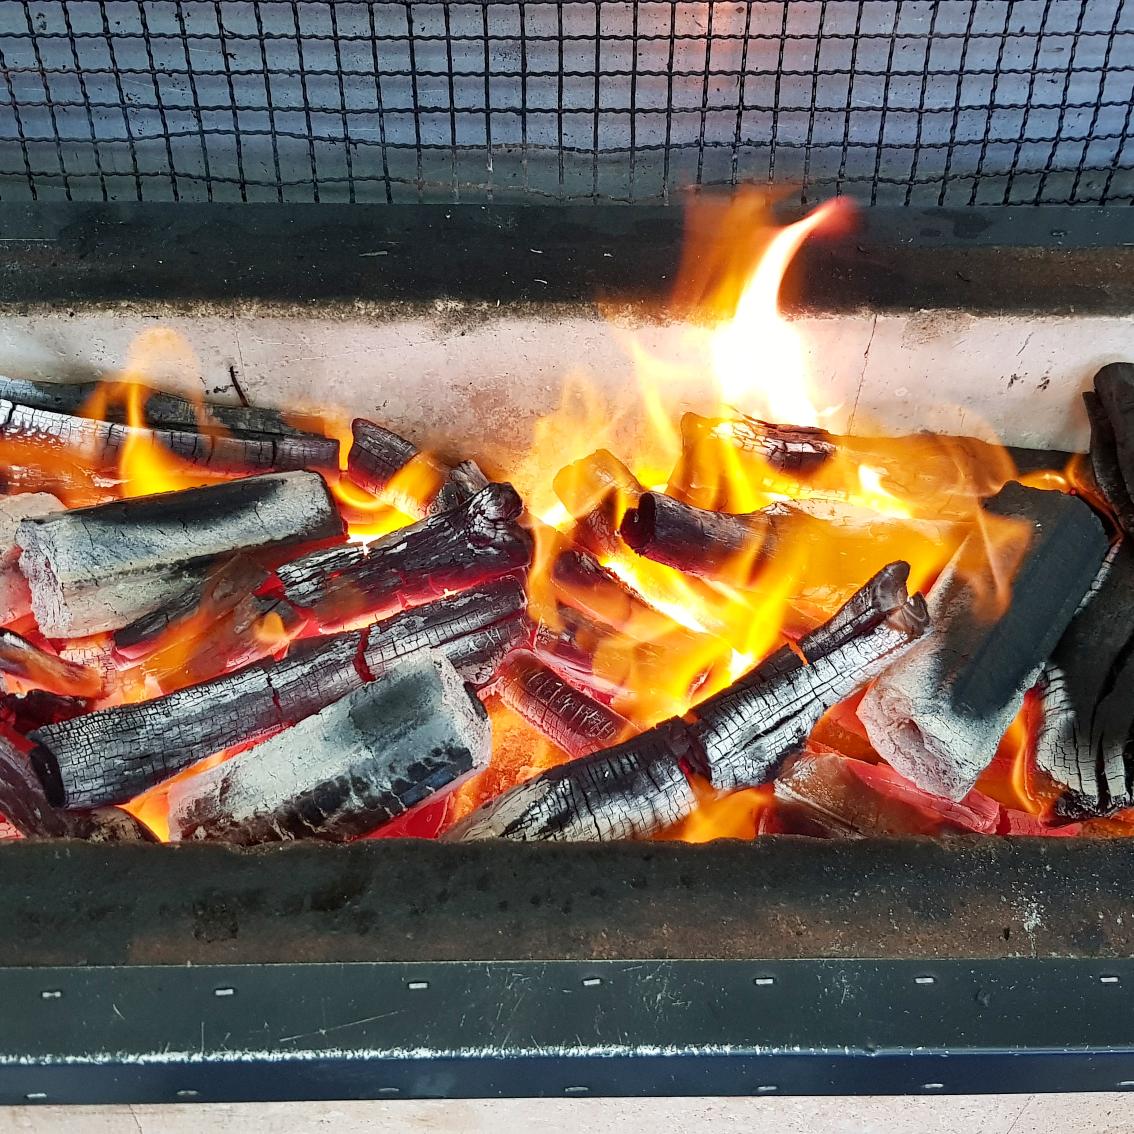 Our Konro charcoal grill is on fire! 🔥 It's spiedie time! 

#spiedieshack #konro #grill #charcoalgrill #konrogrill #spiedies #streetfood #yummy #food #yummyfood #foodie #foodlover #SurreyQuays #CanadaWater #Rotherhithe #Bermondsey #London